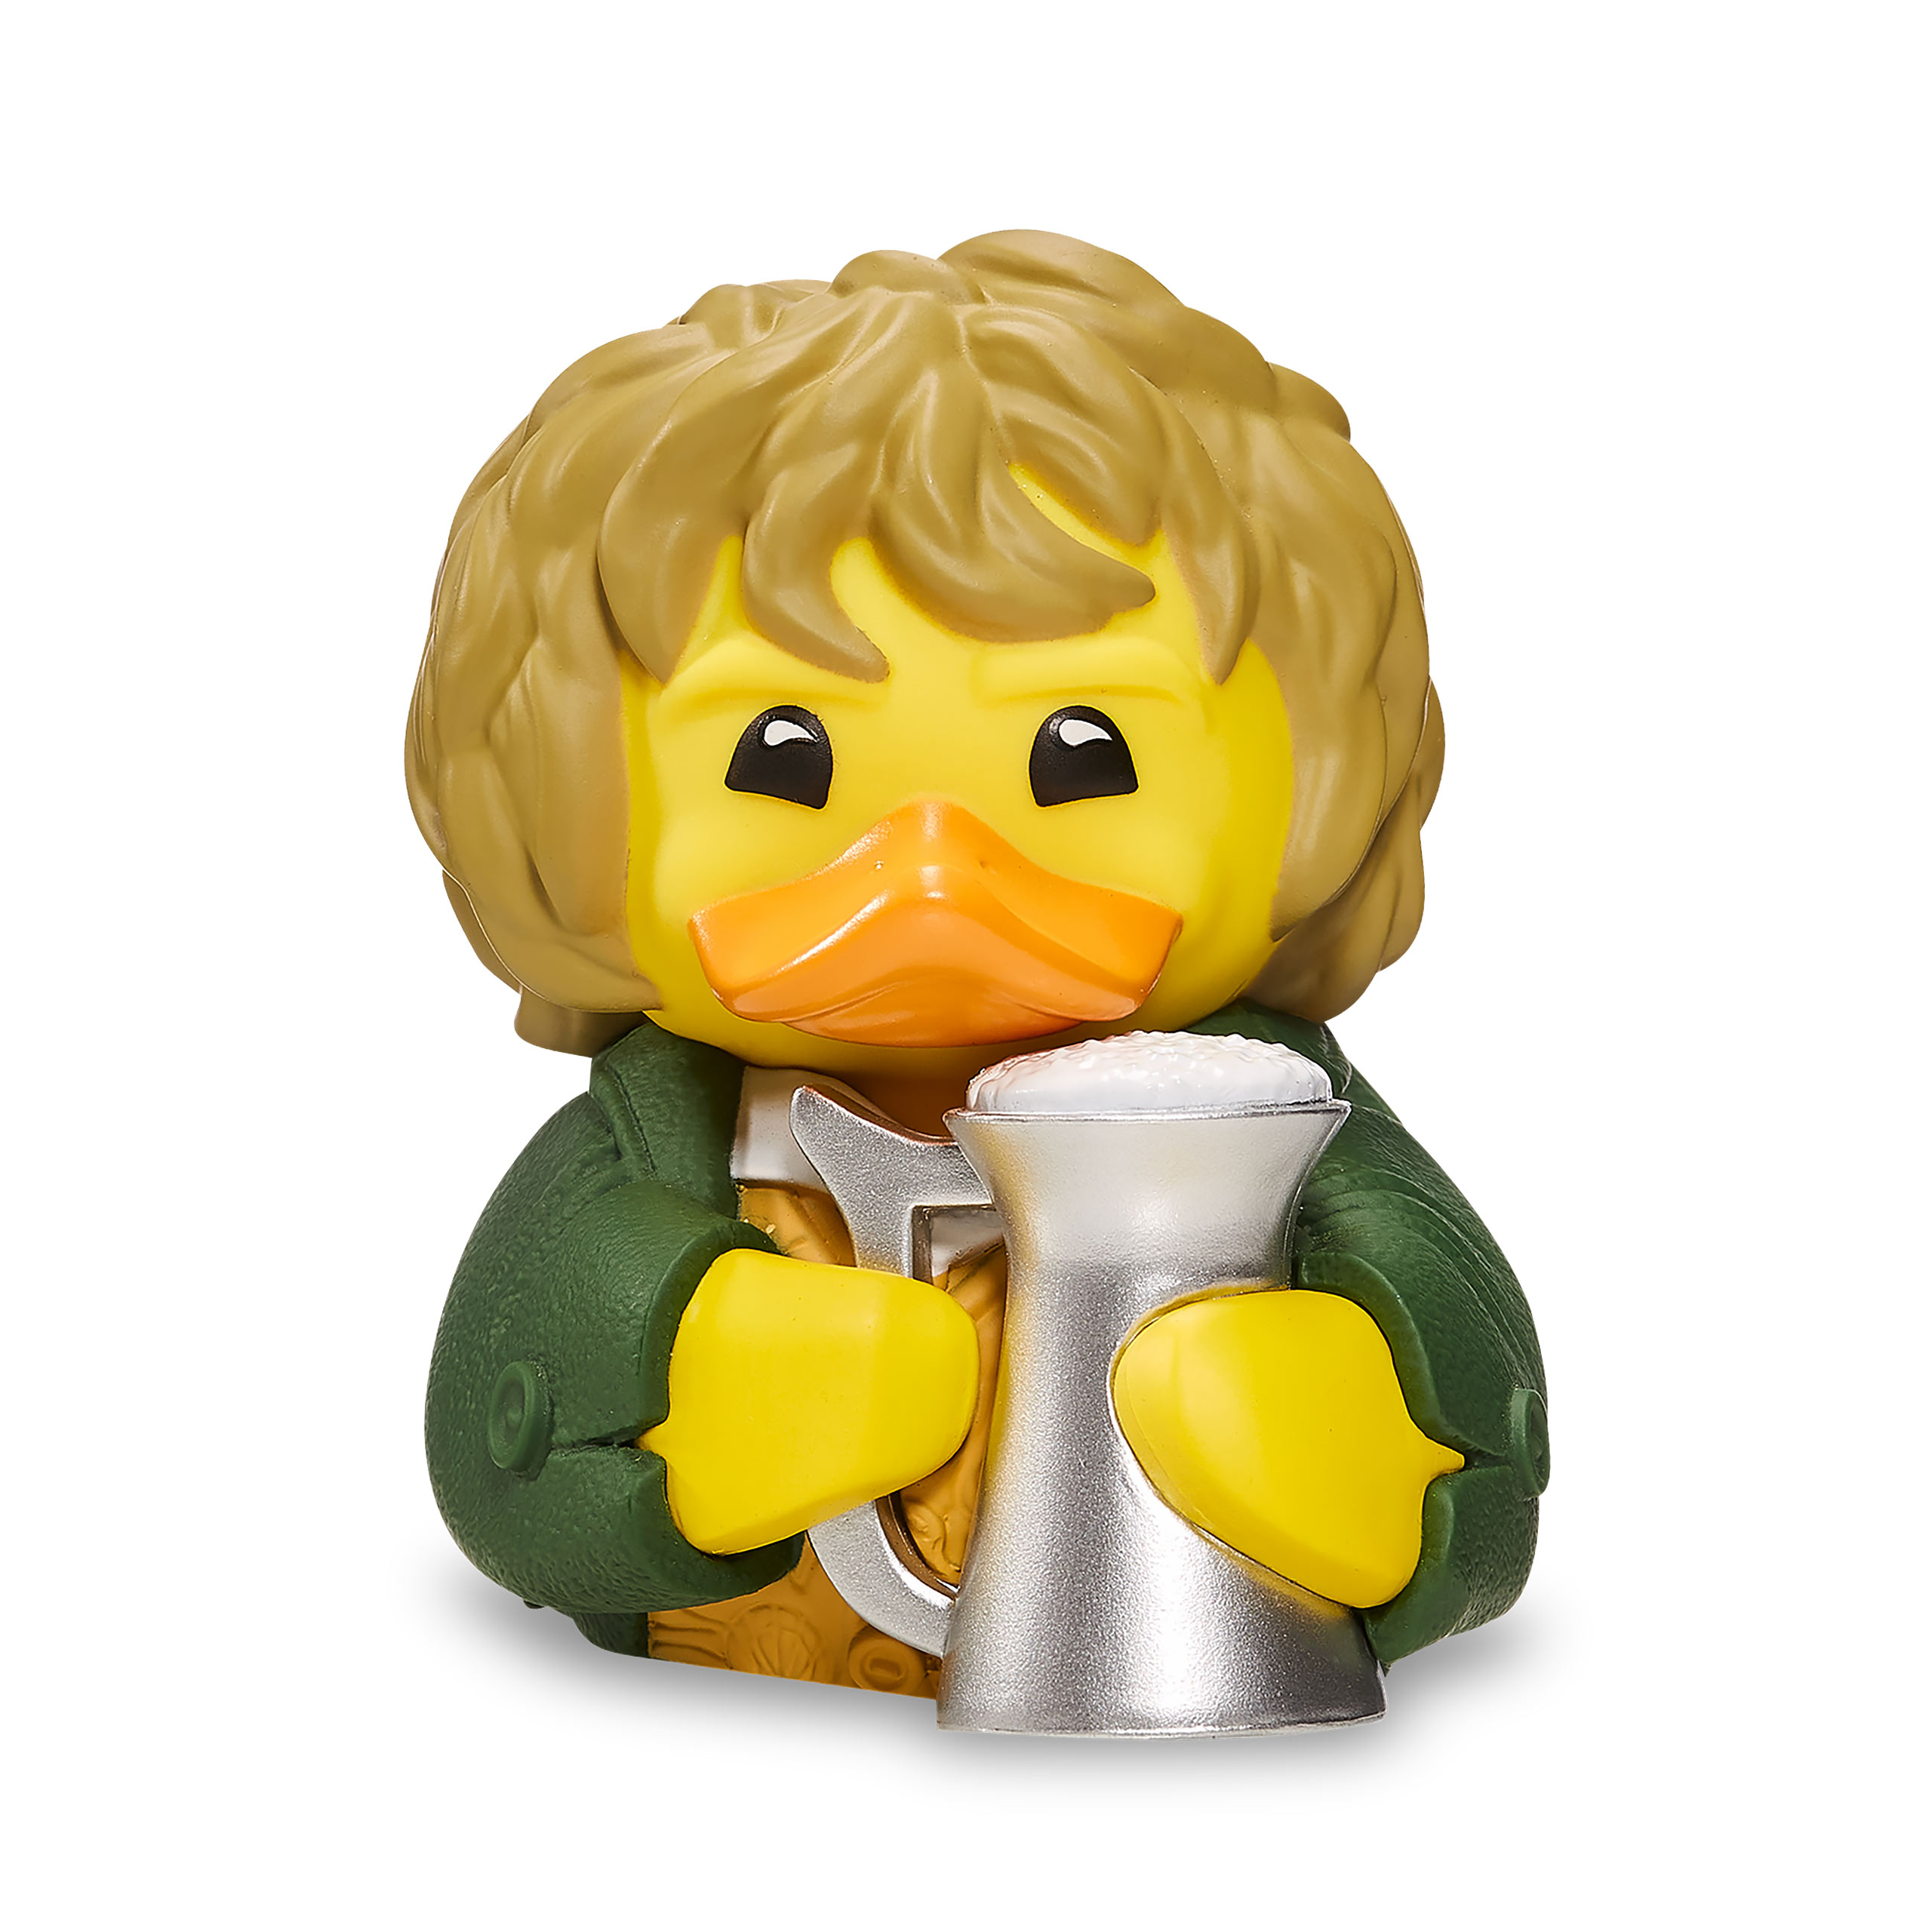 Lord of the Rings - Merry Brandybuck TUBBZ Decorative Duck